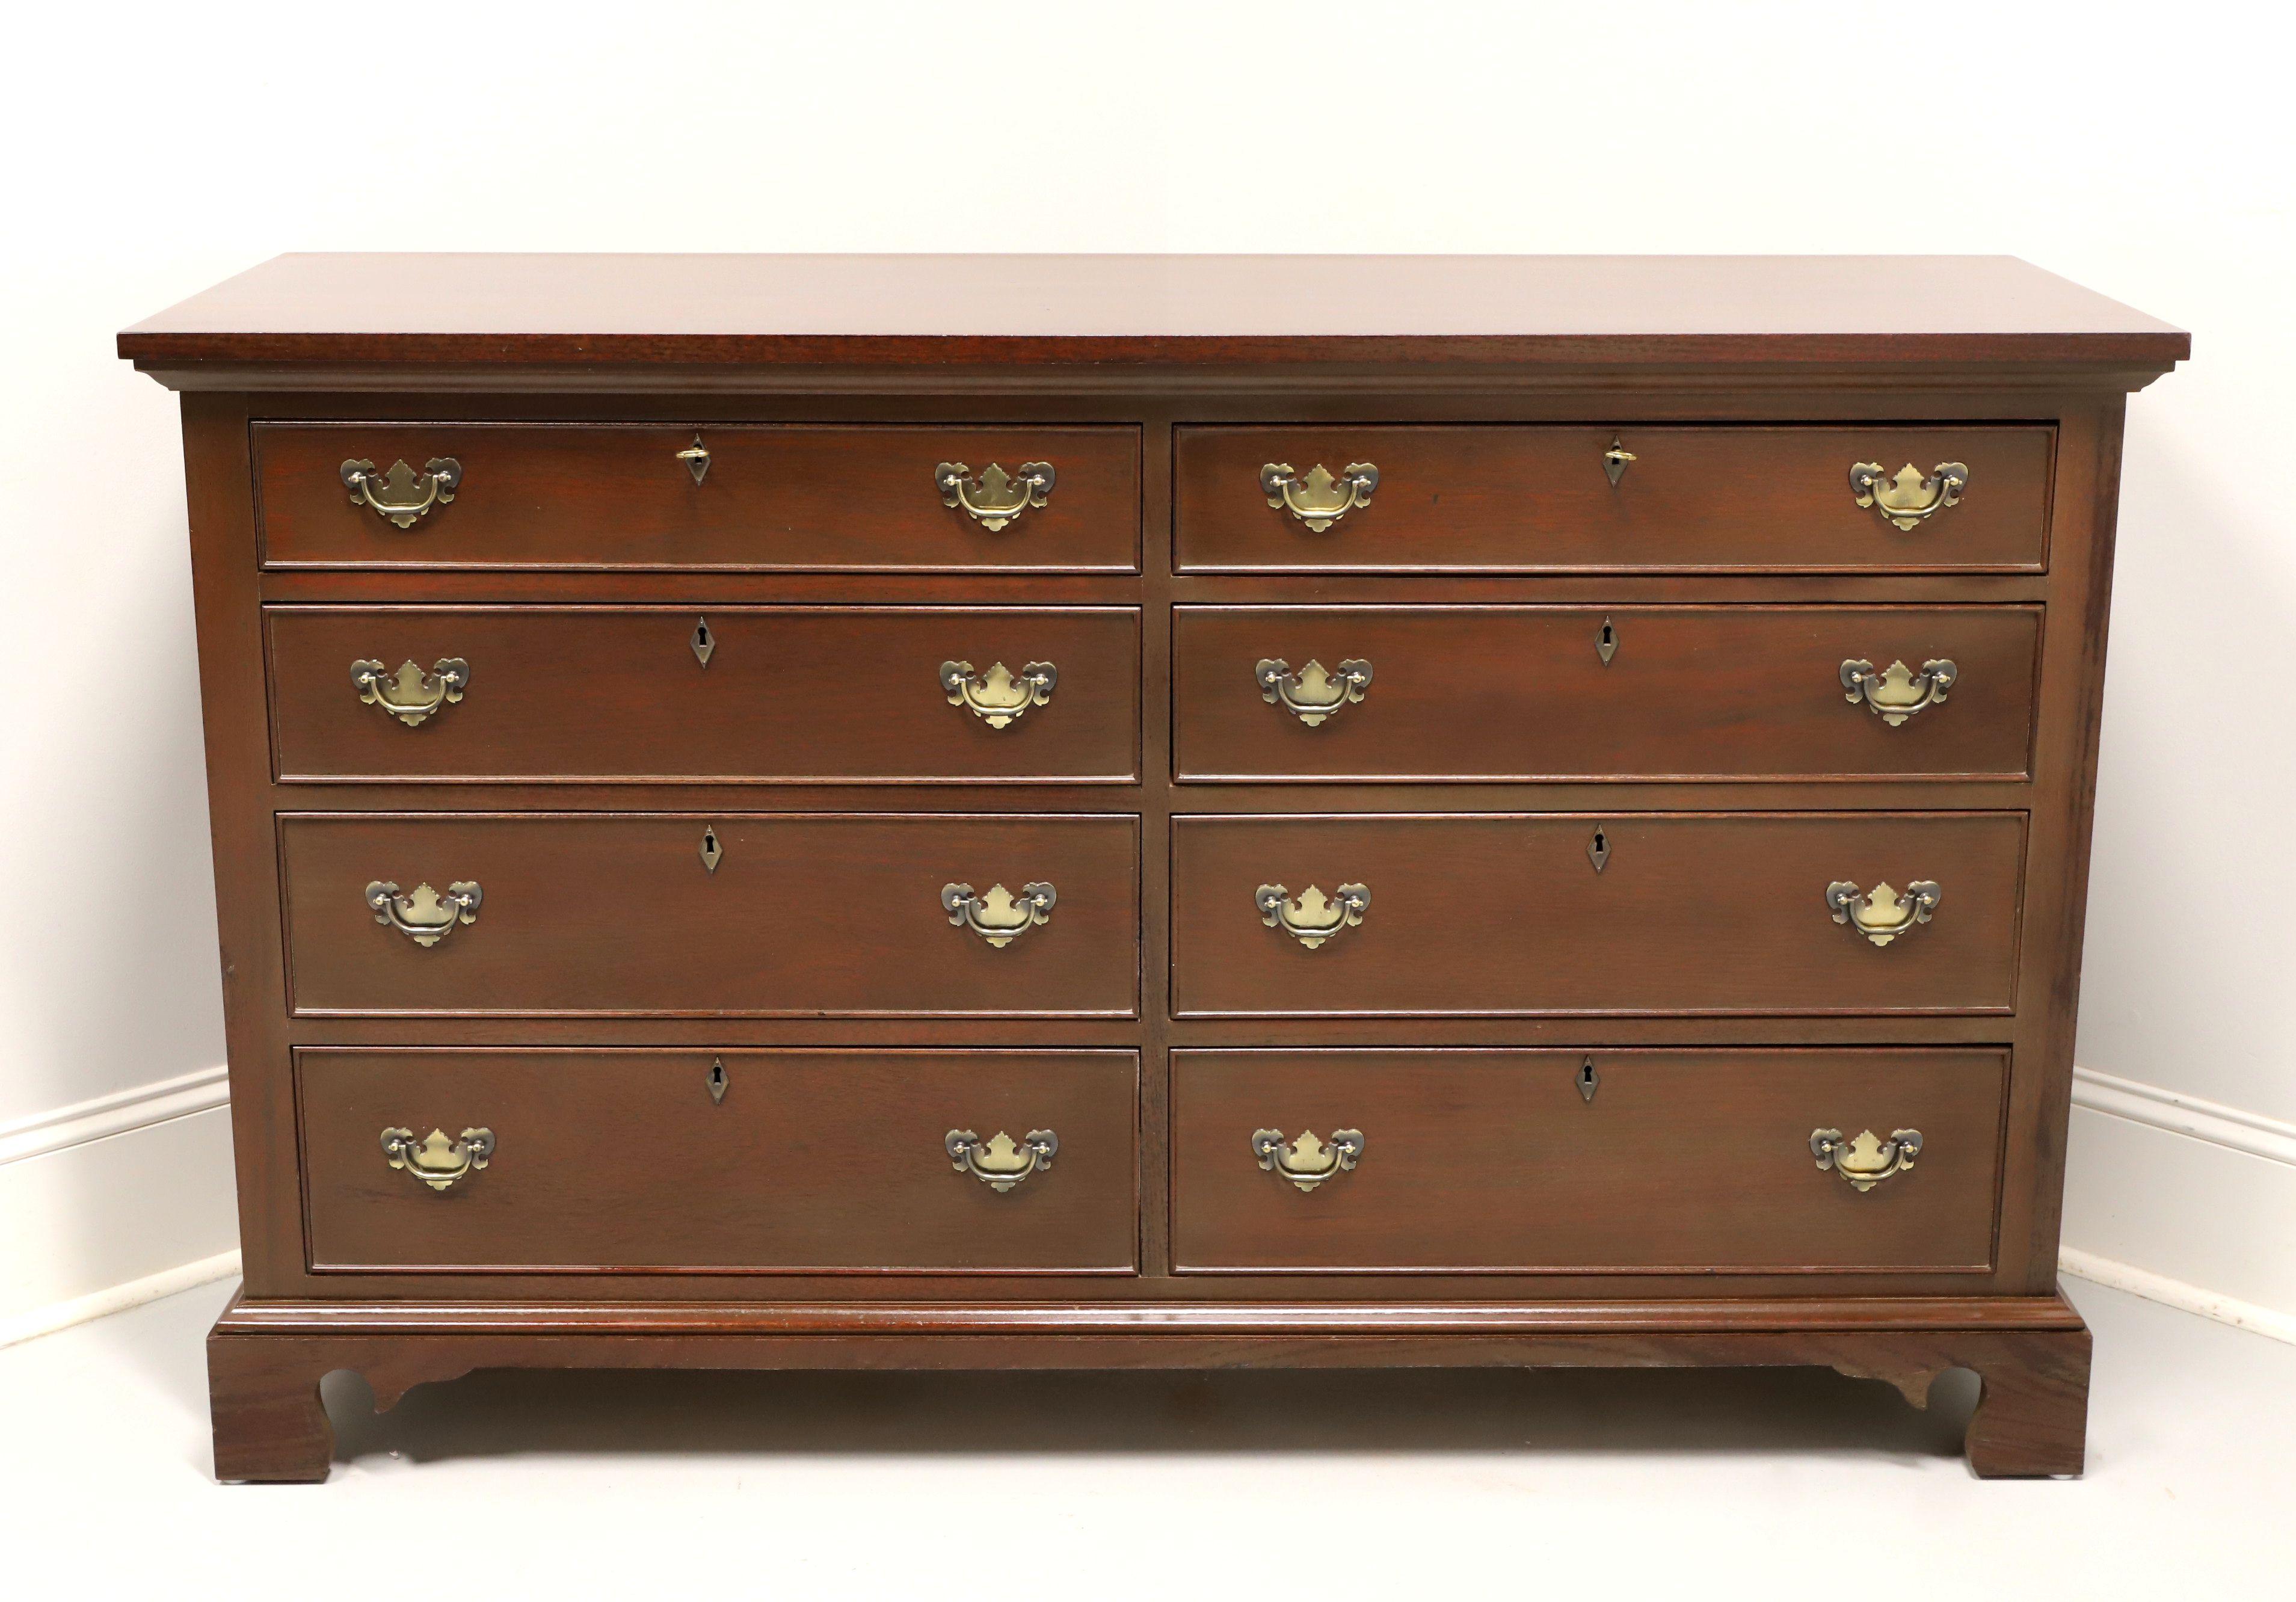 A Chippendale style double dresser by top-quality furniture maker Craftique. Solid mahogany with brass hardware, cockbeading to drawer fronts and bracket feet. Features eight various size lockable drawers of dovetail construction. Includes two keys.